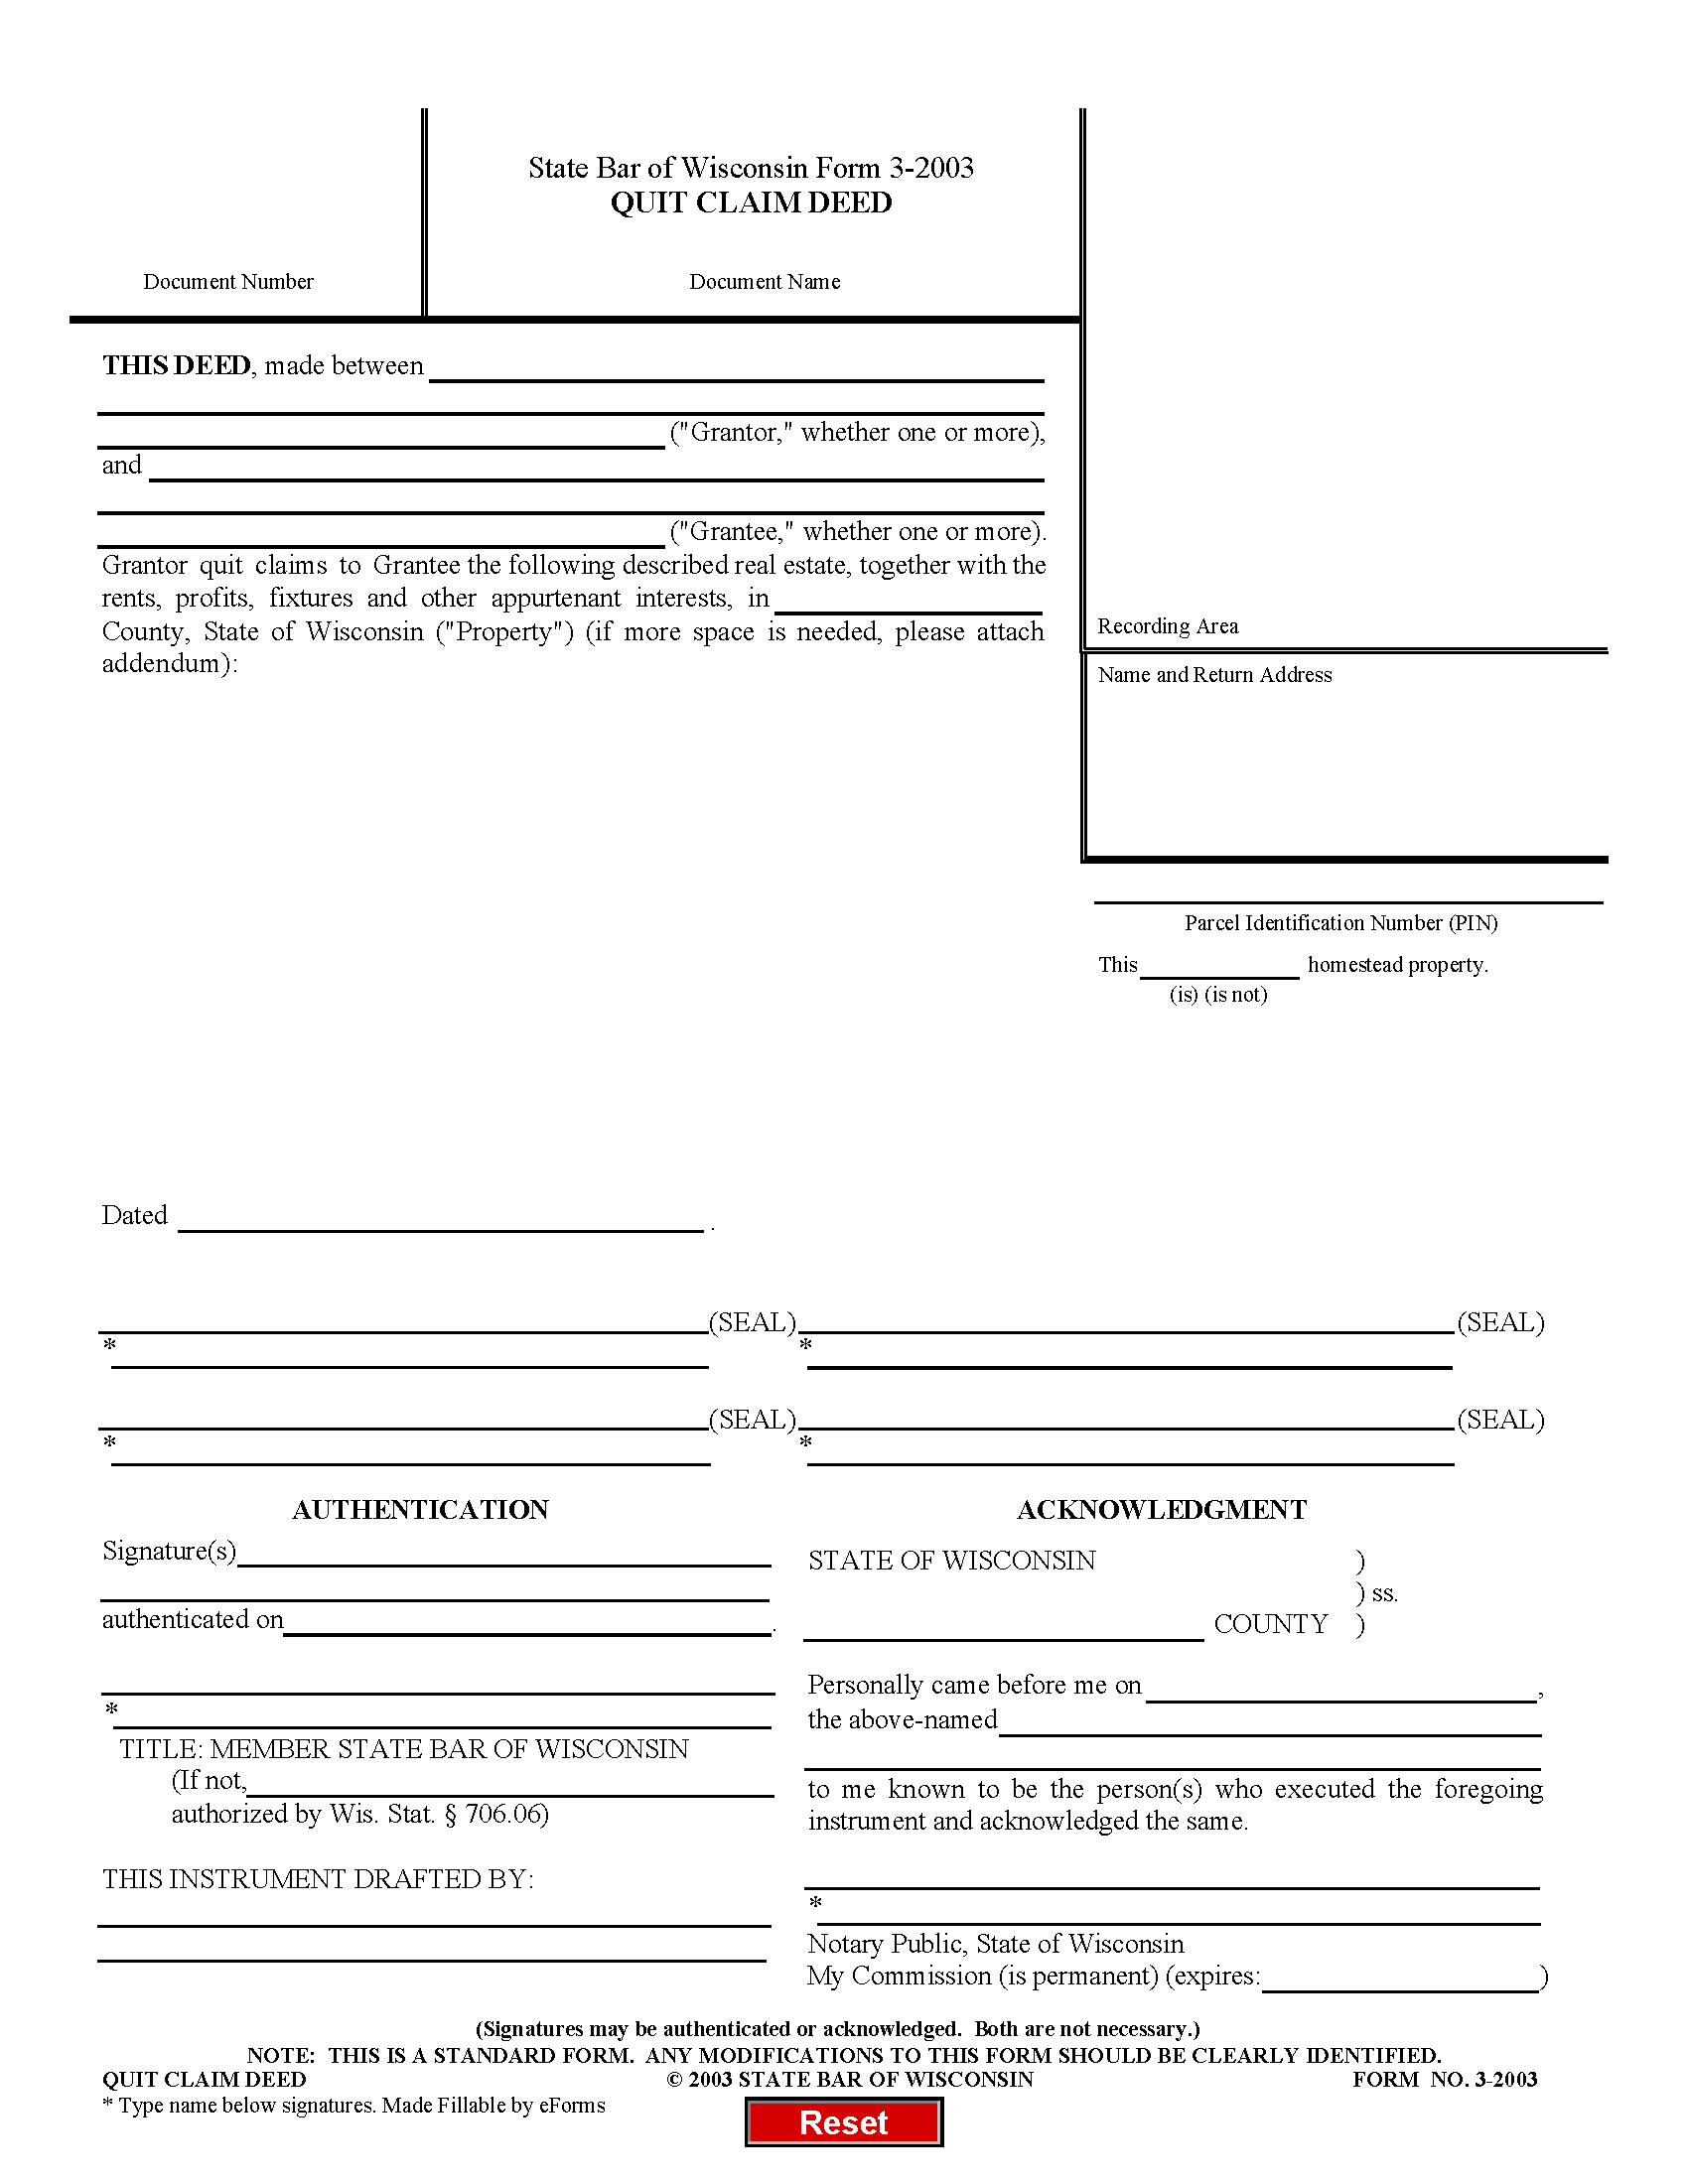 wisconsin-quit-claim-deed-form-bar-version-form-3-2003-eforms